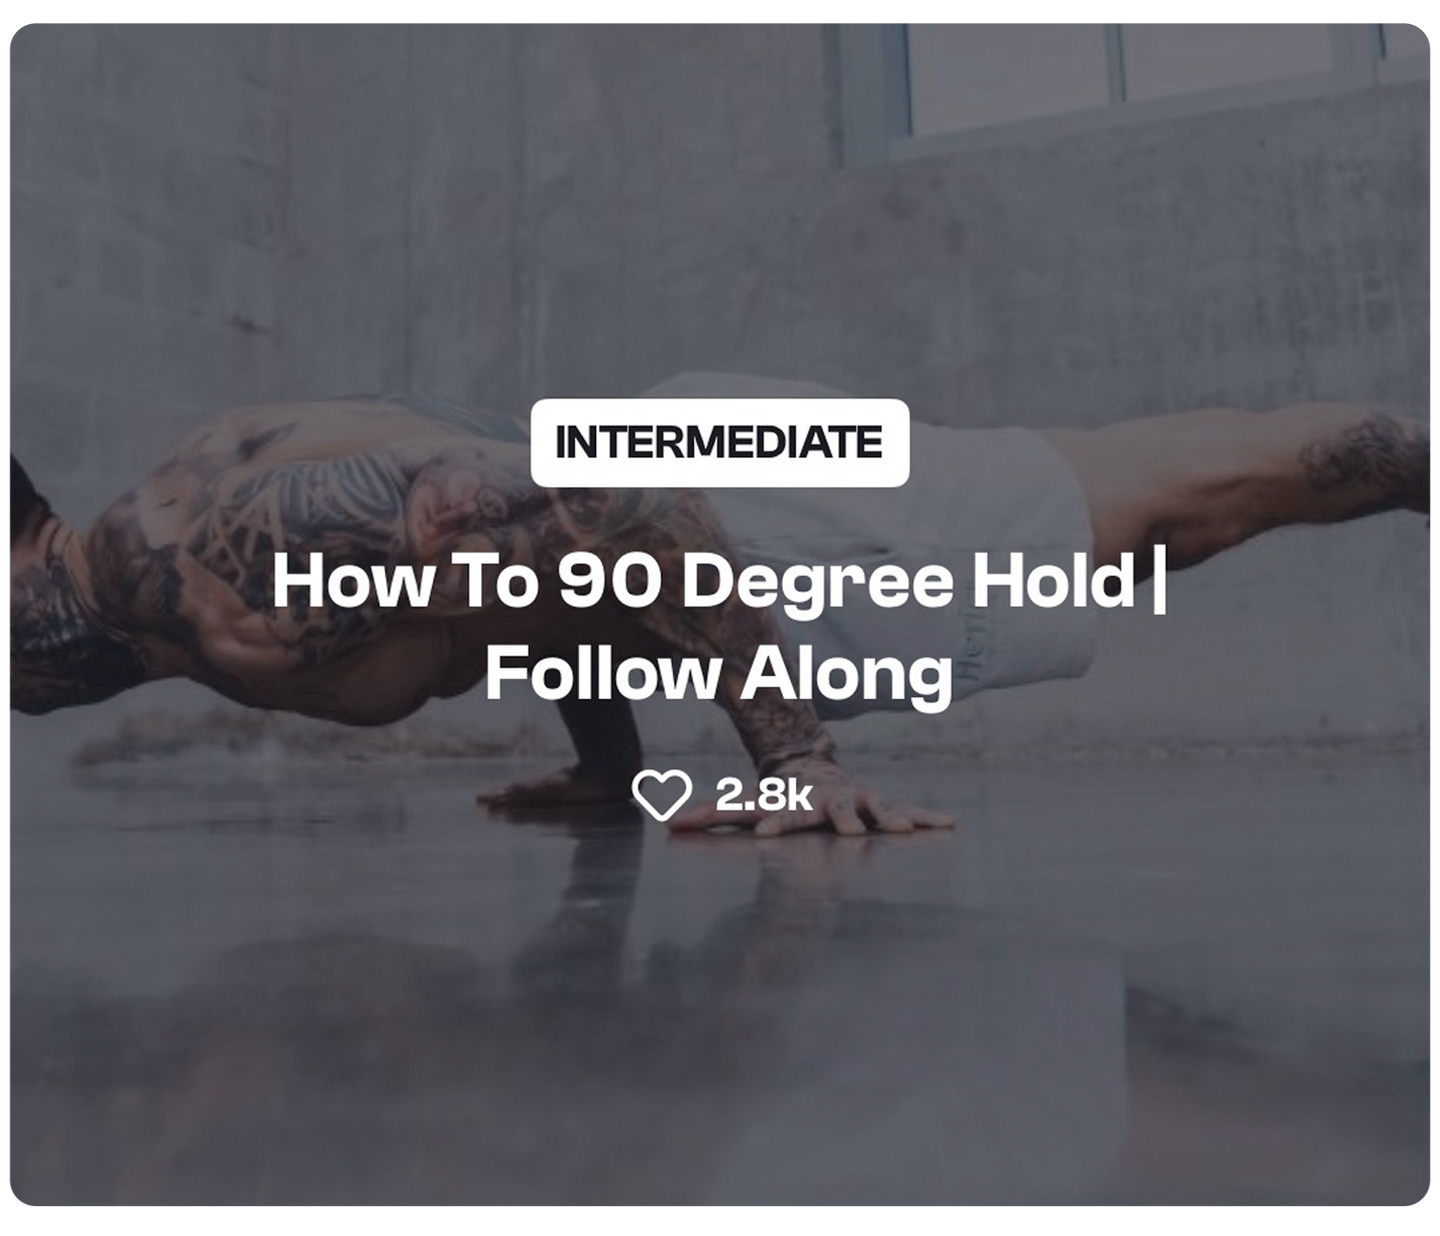 How To 90 Degree Hold | Follow Along - THENX